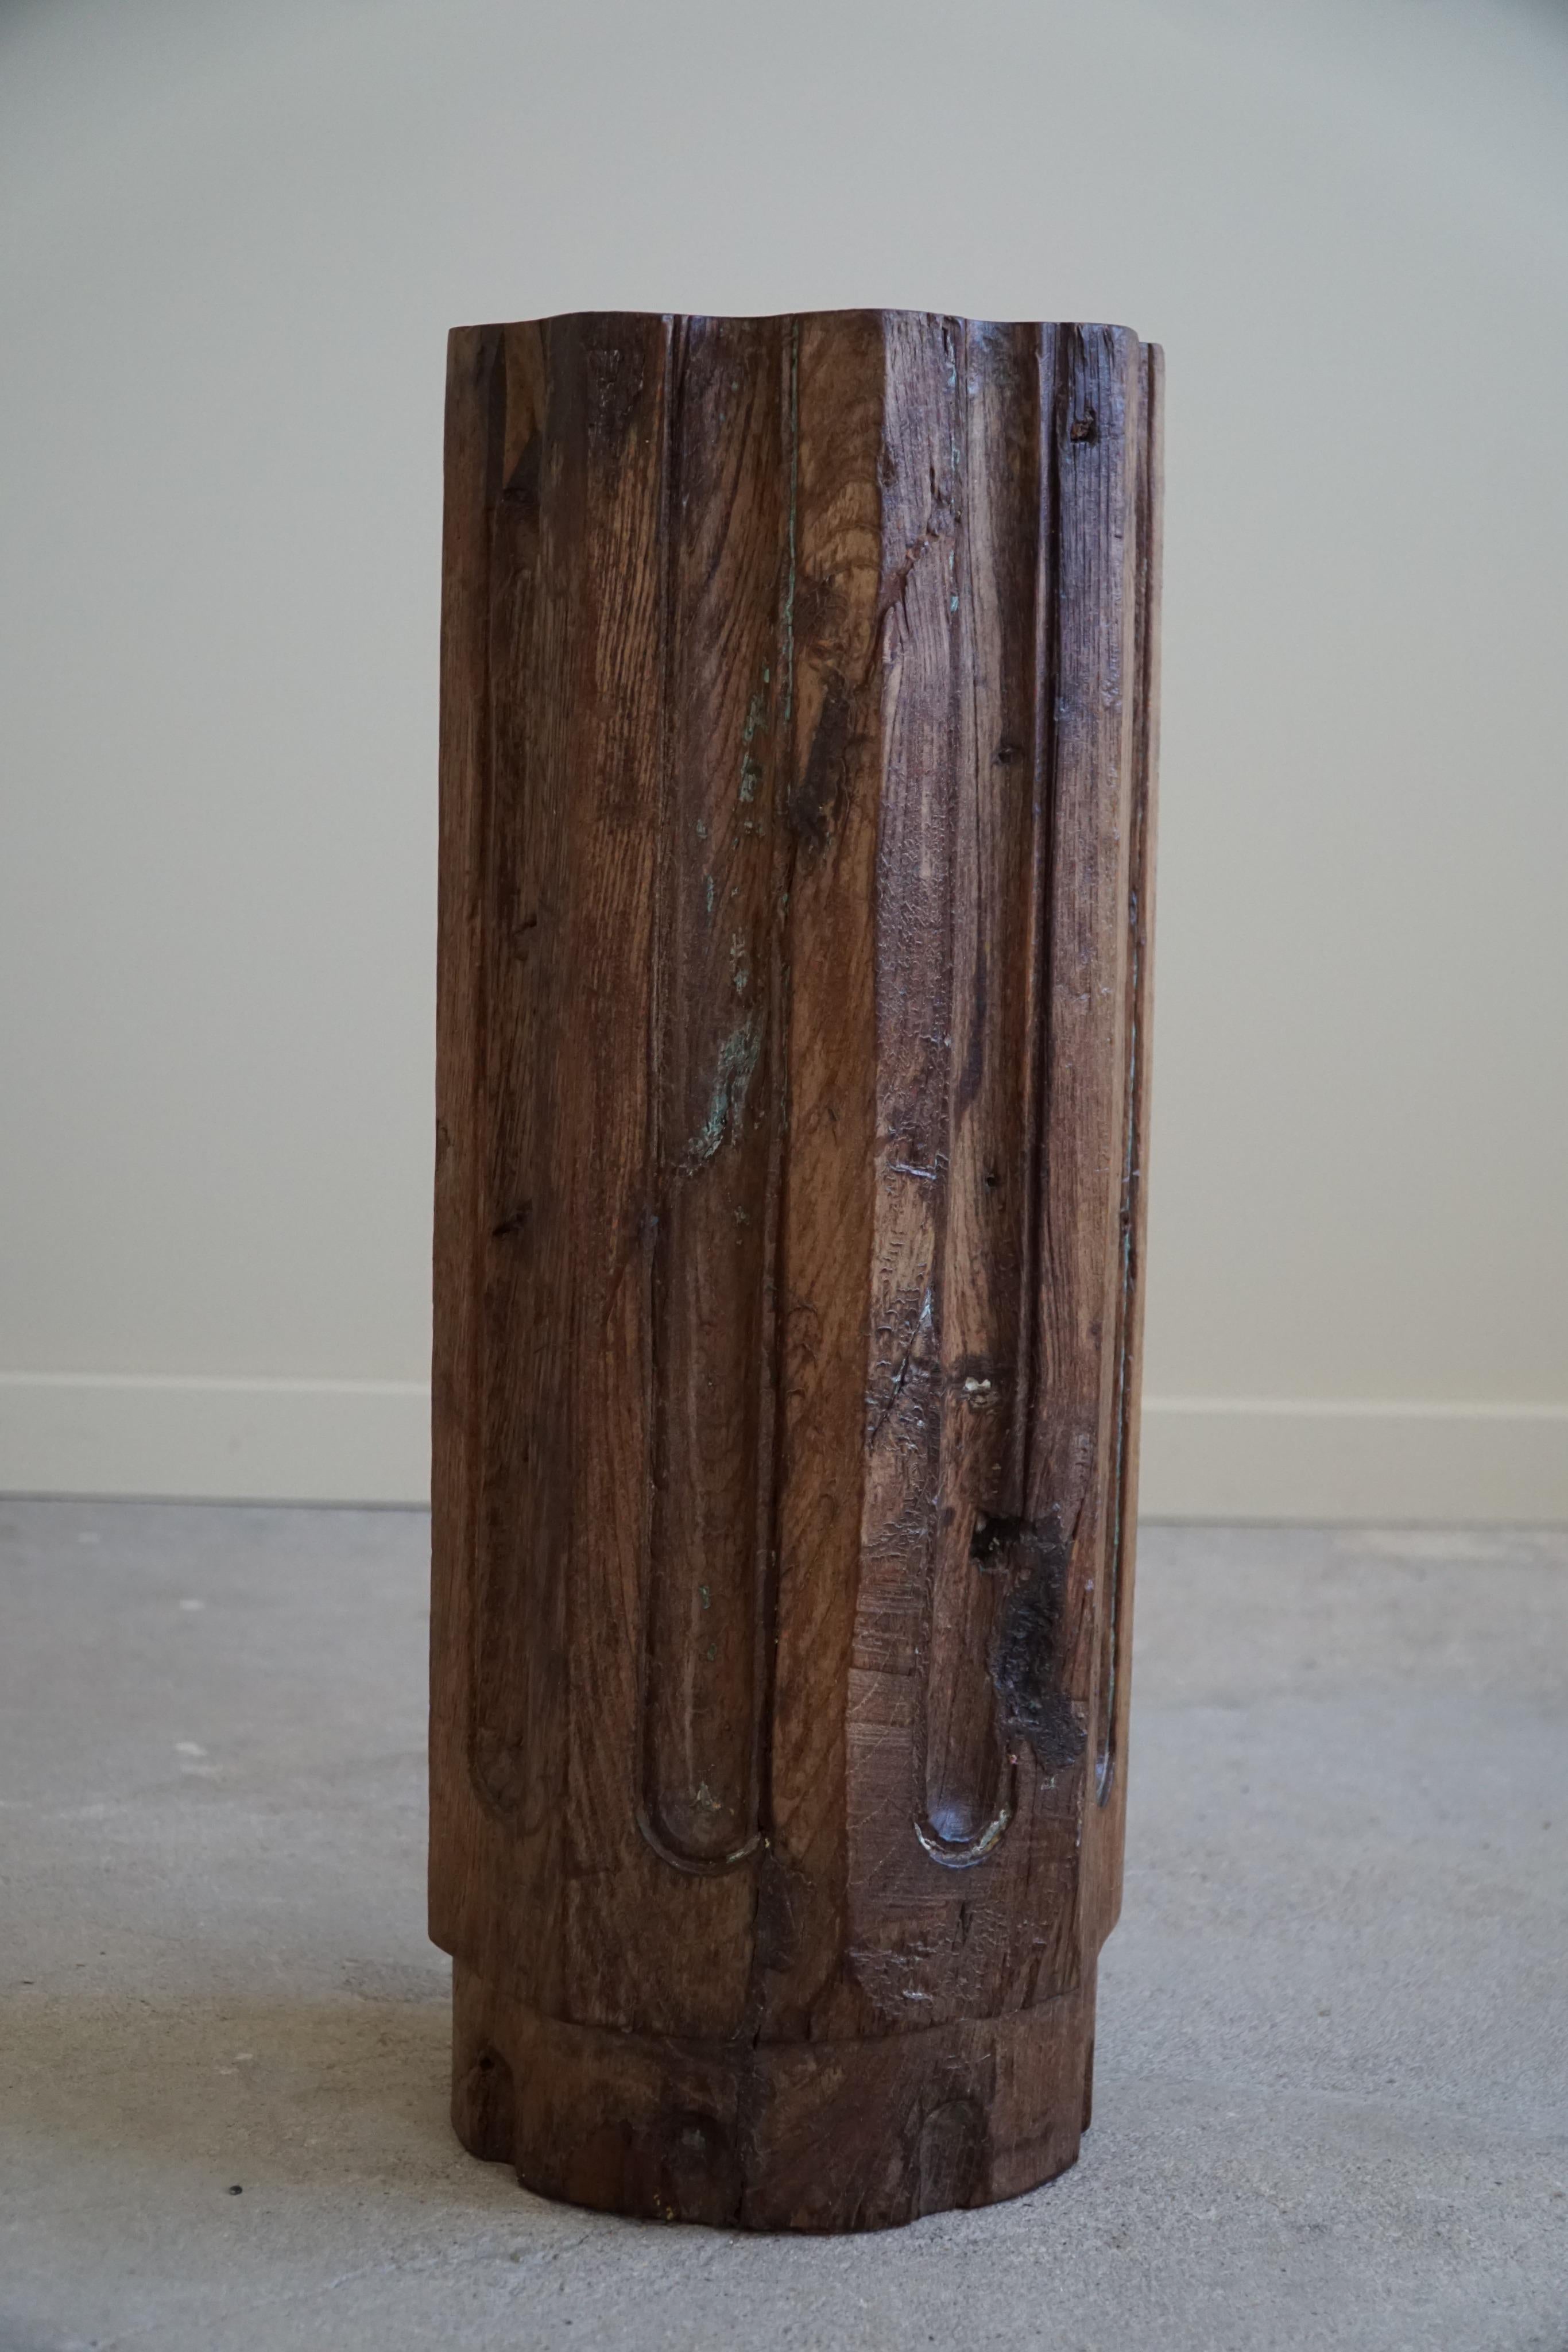 Hand-Carved Solid Wooden Handcrafted Torchére, Floor Candle Holder from the 1920s